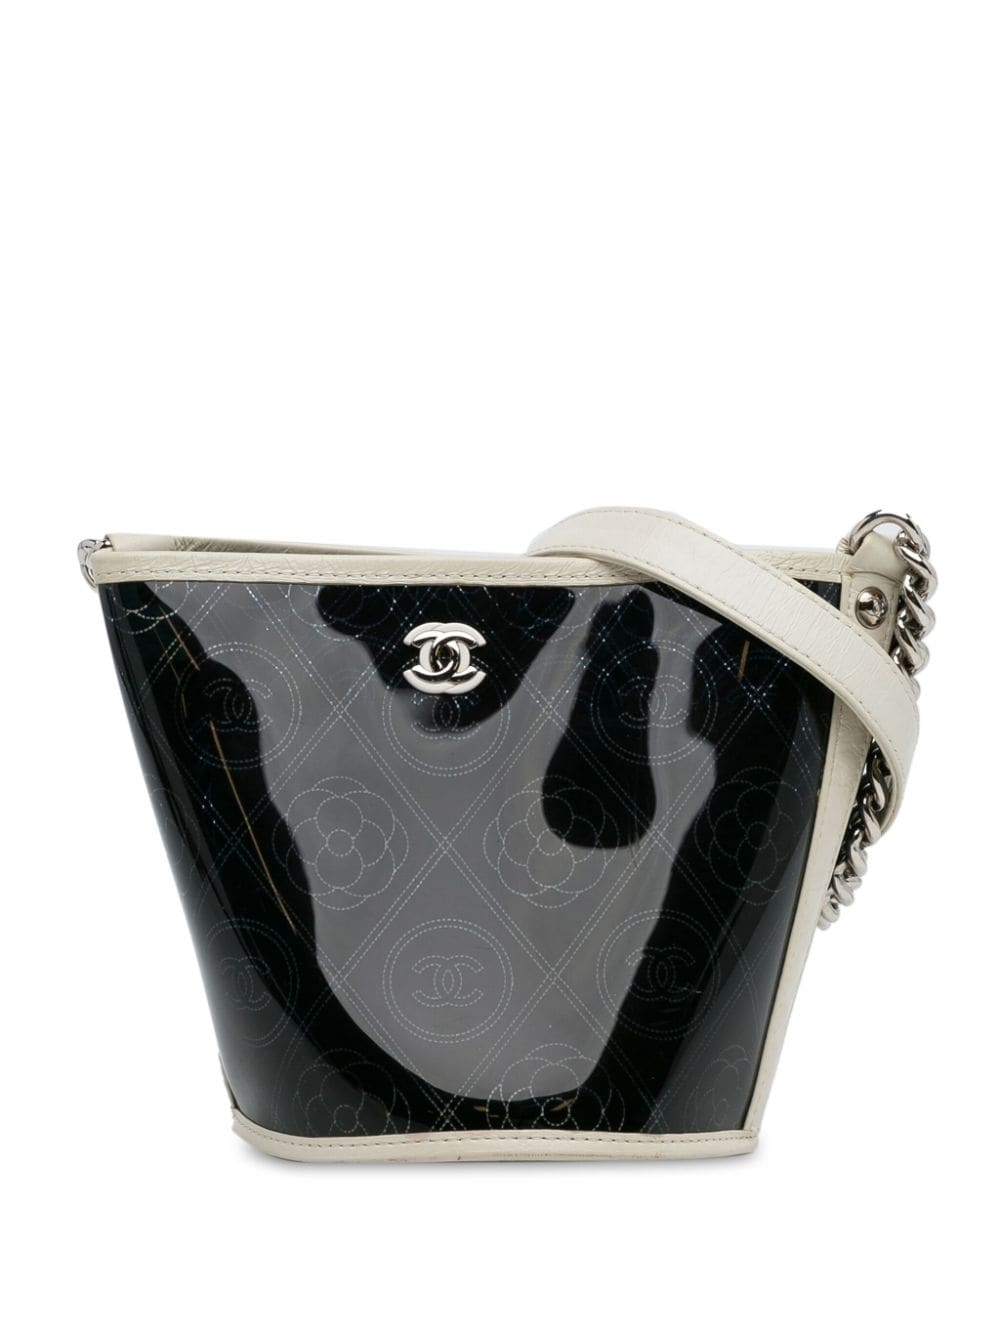 Pre-owned Chanel 2018 Pvc Camellia Bucket Bag In Black